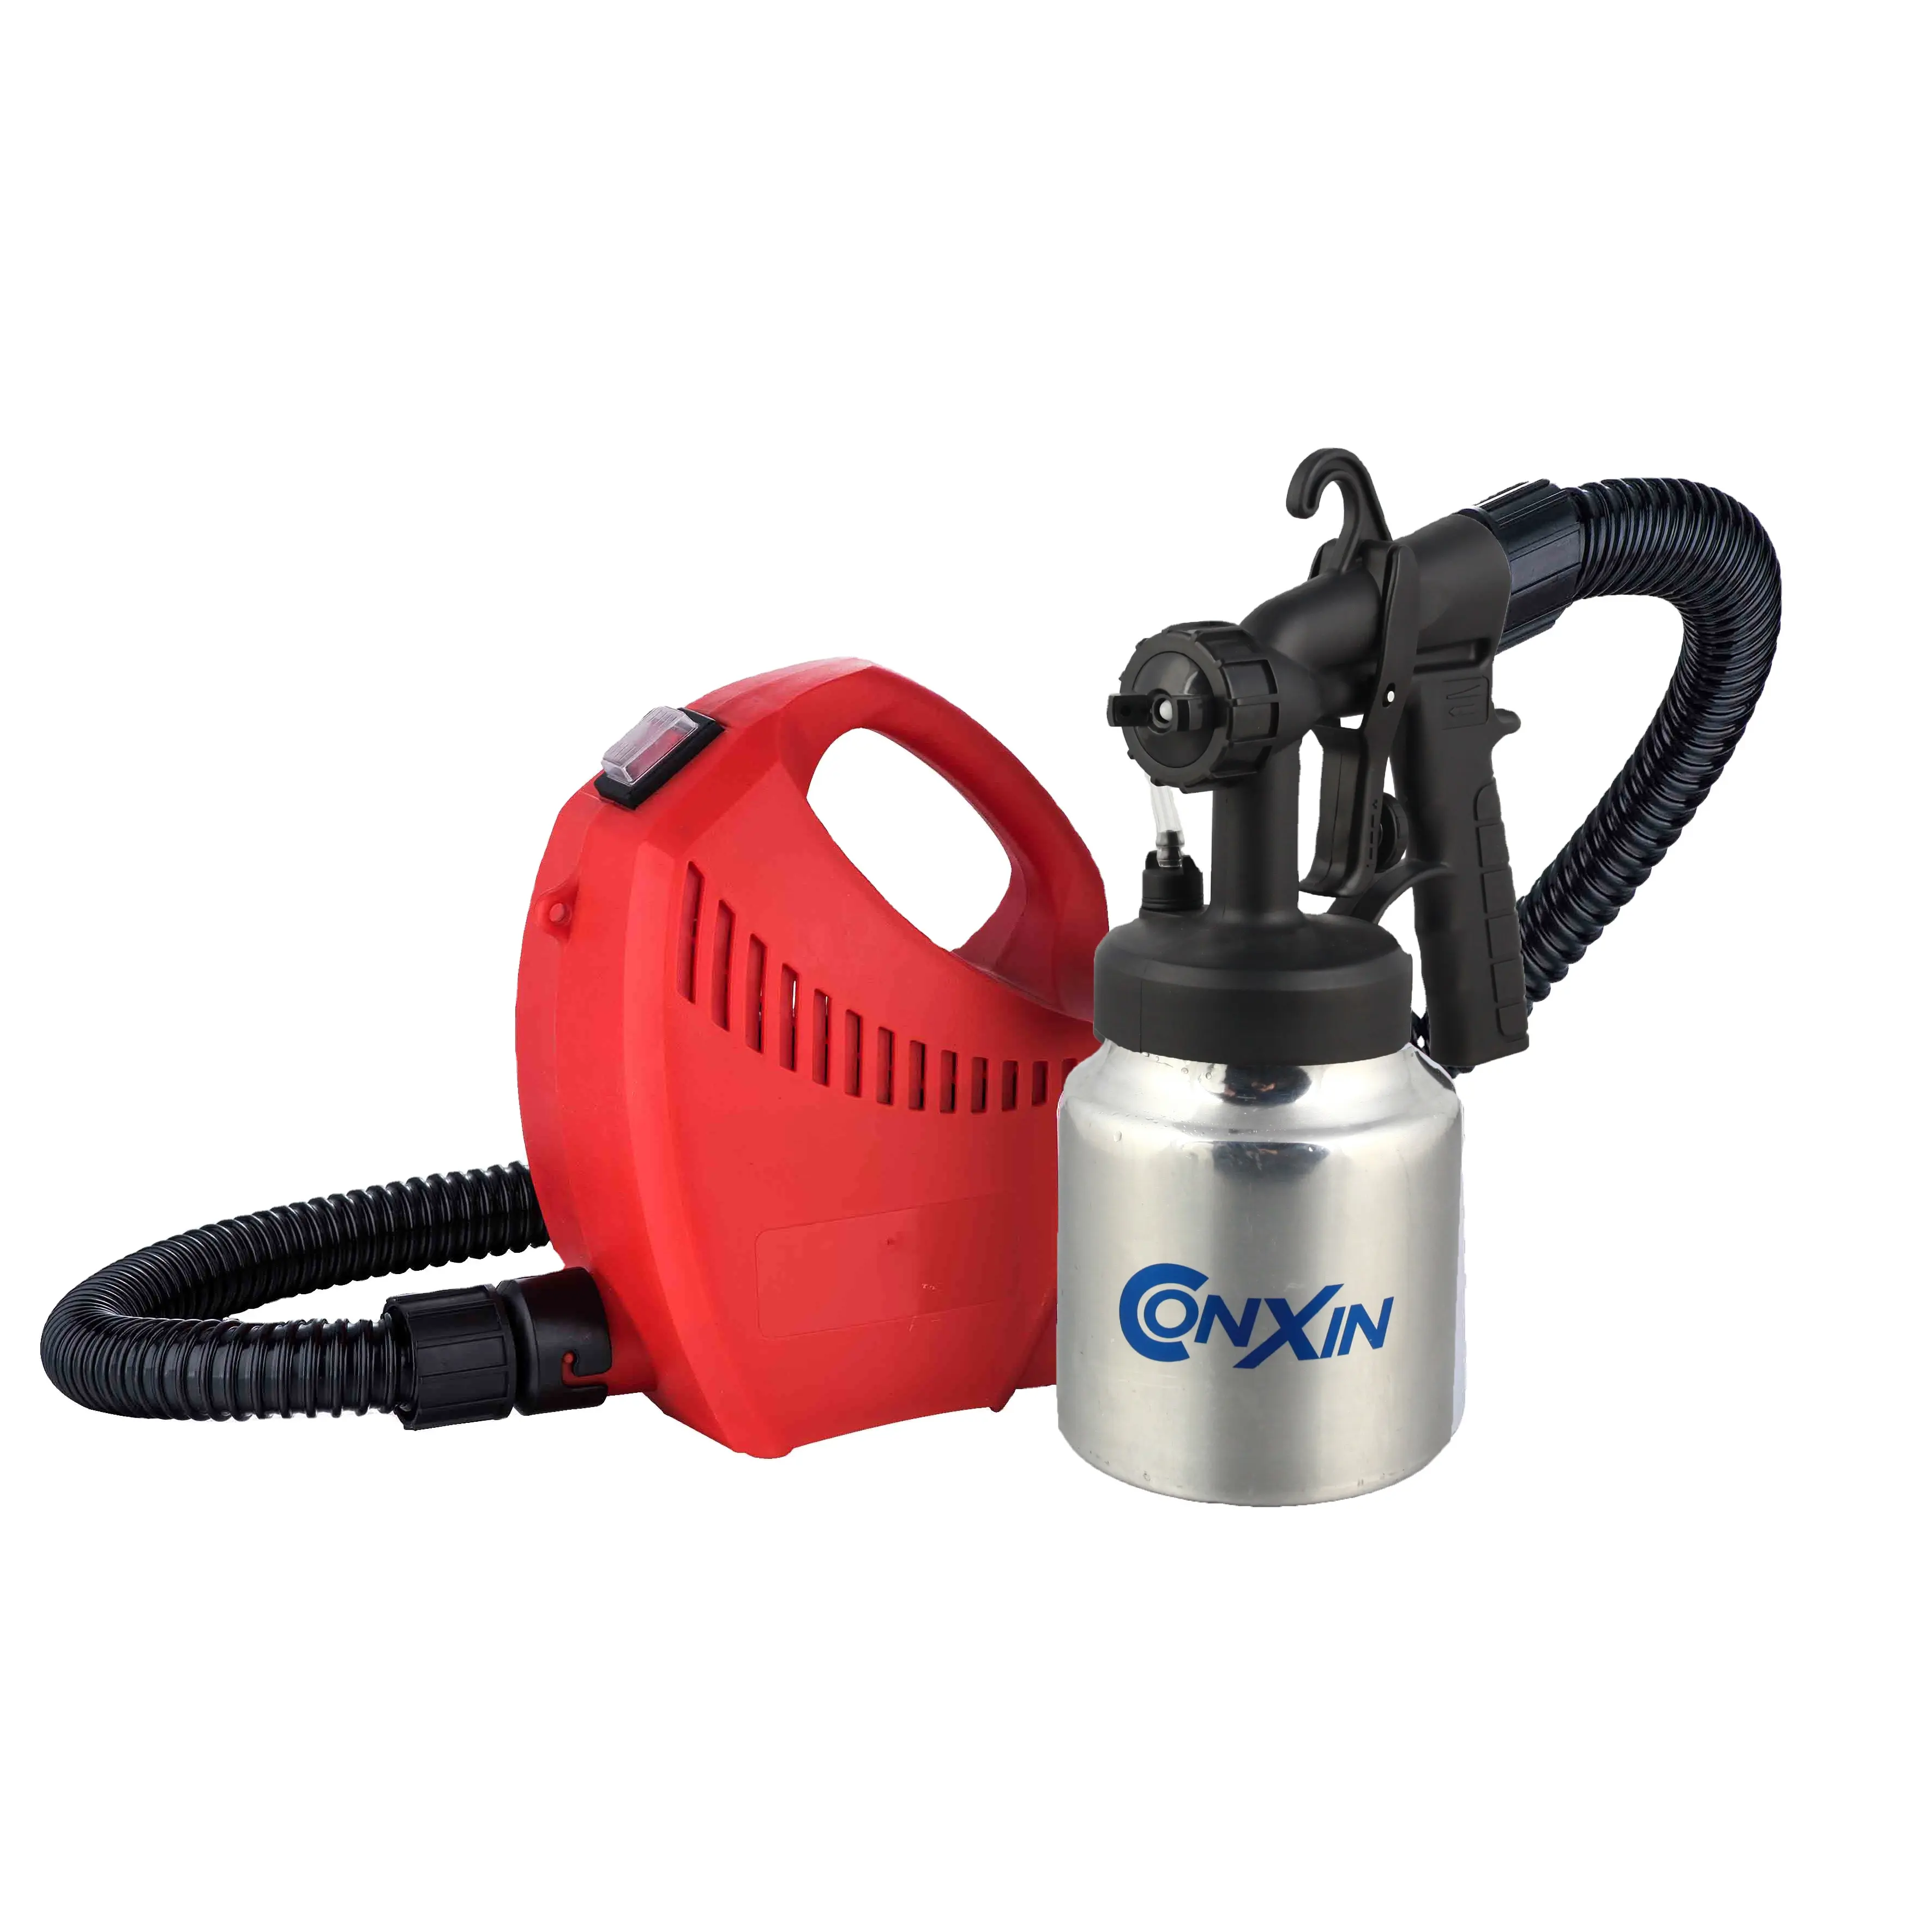 Profession 650W electric wall paint spray gunr top manufacturer